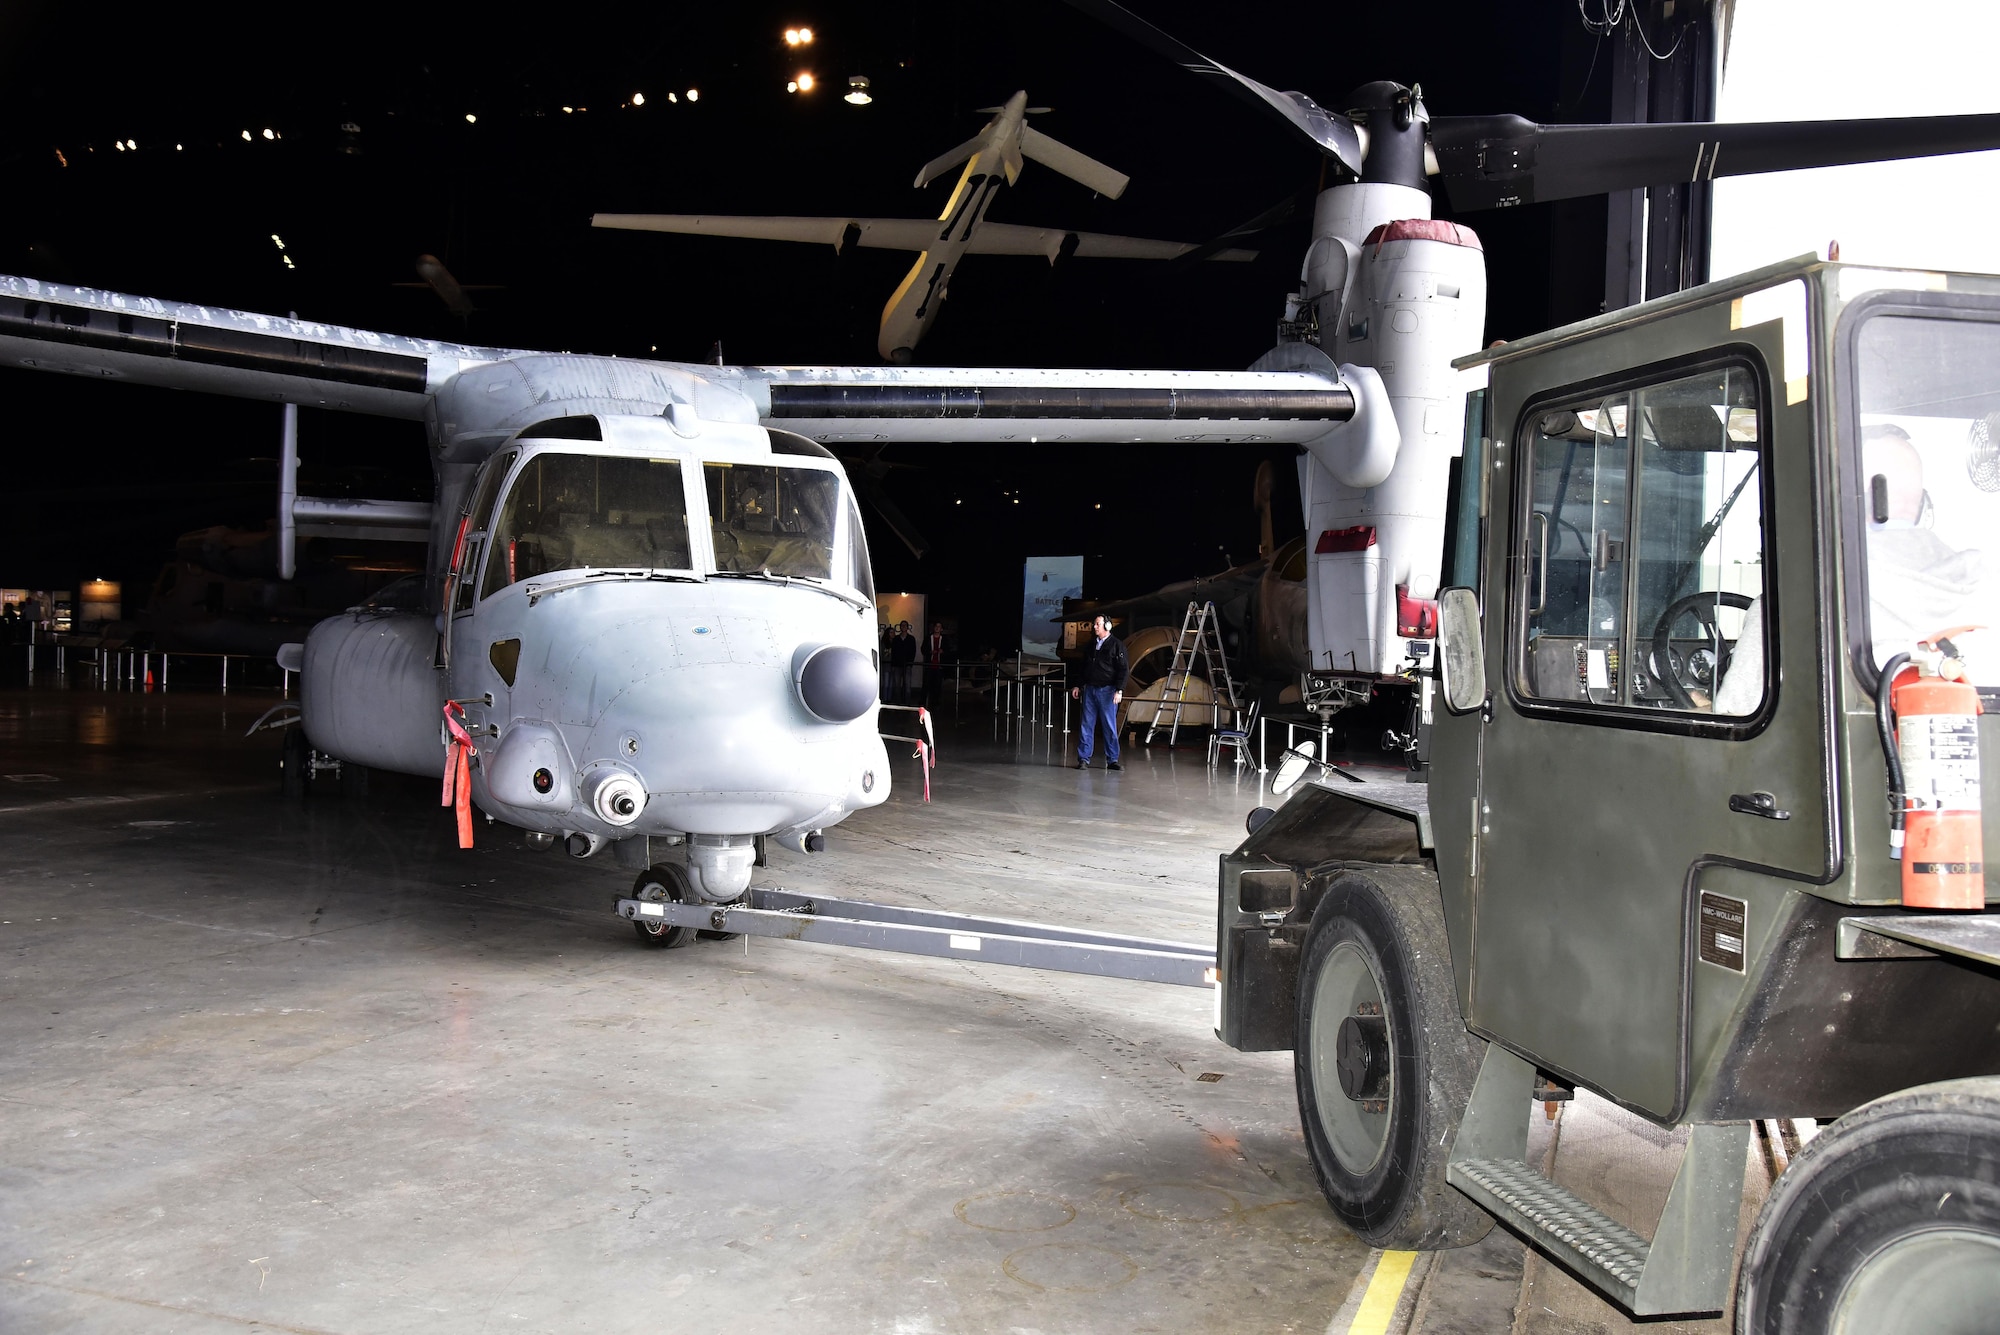 DAYTON, Ohio -- Bell-Boeing CV-22B Osprey being moved into position in the Cold War Gallery at the National Museum of the United States Air Force. This restoration crew member worked as part of a team to complete the gallery reconfiguration on Jan. 26, 2017. (U.S. Air Force photo)